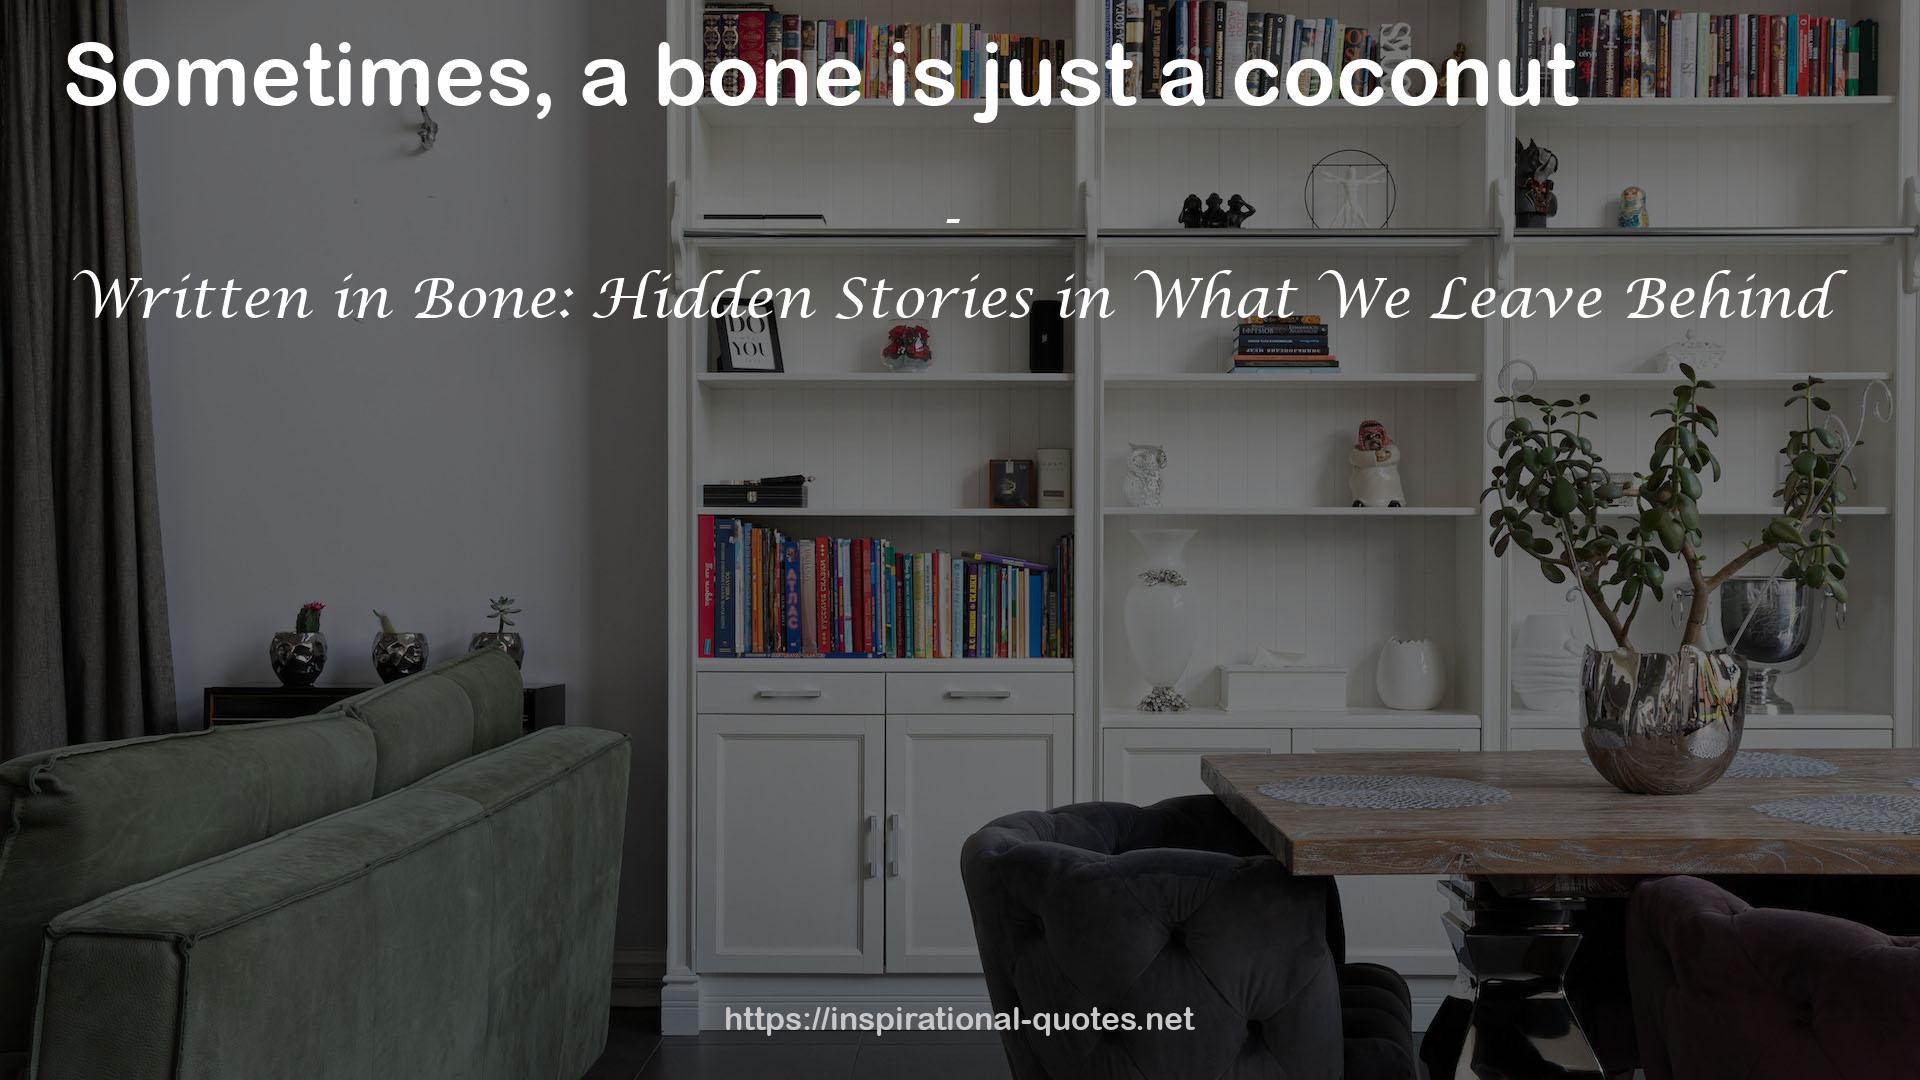 Written in Bone: Hidden Stories in What We Leave Behind QUOTES